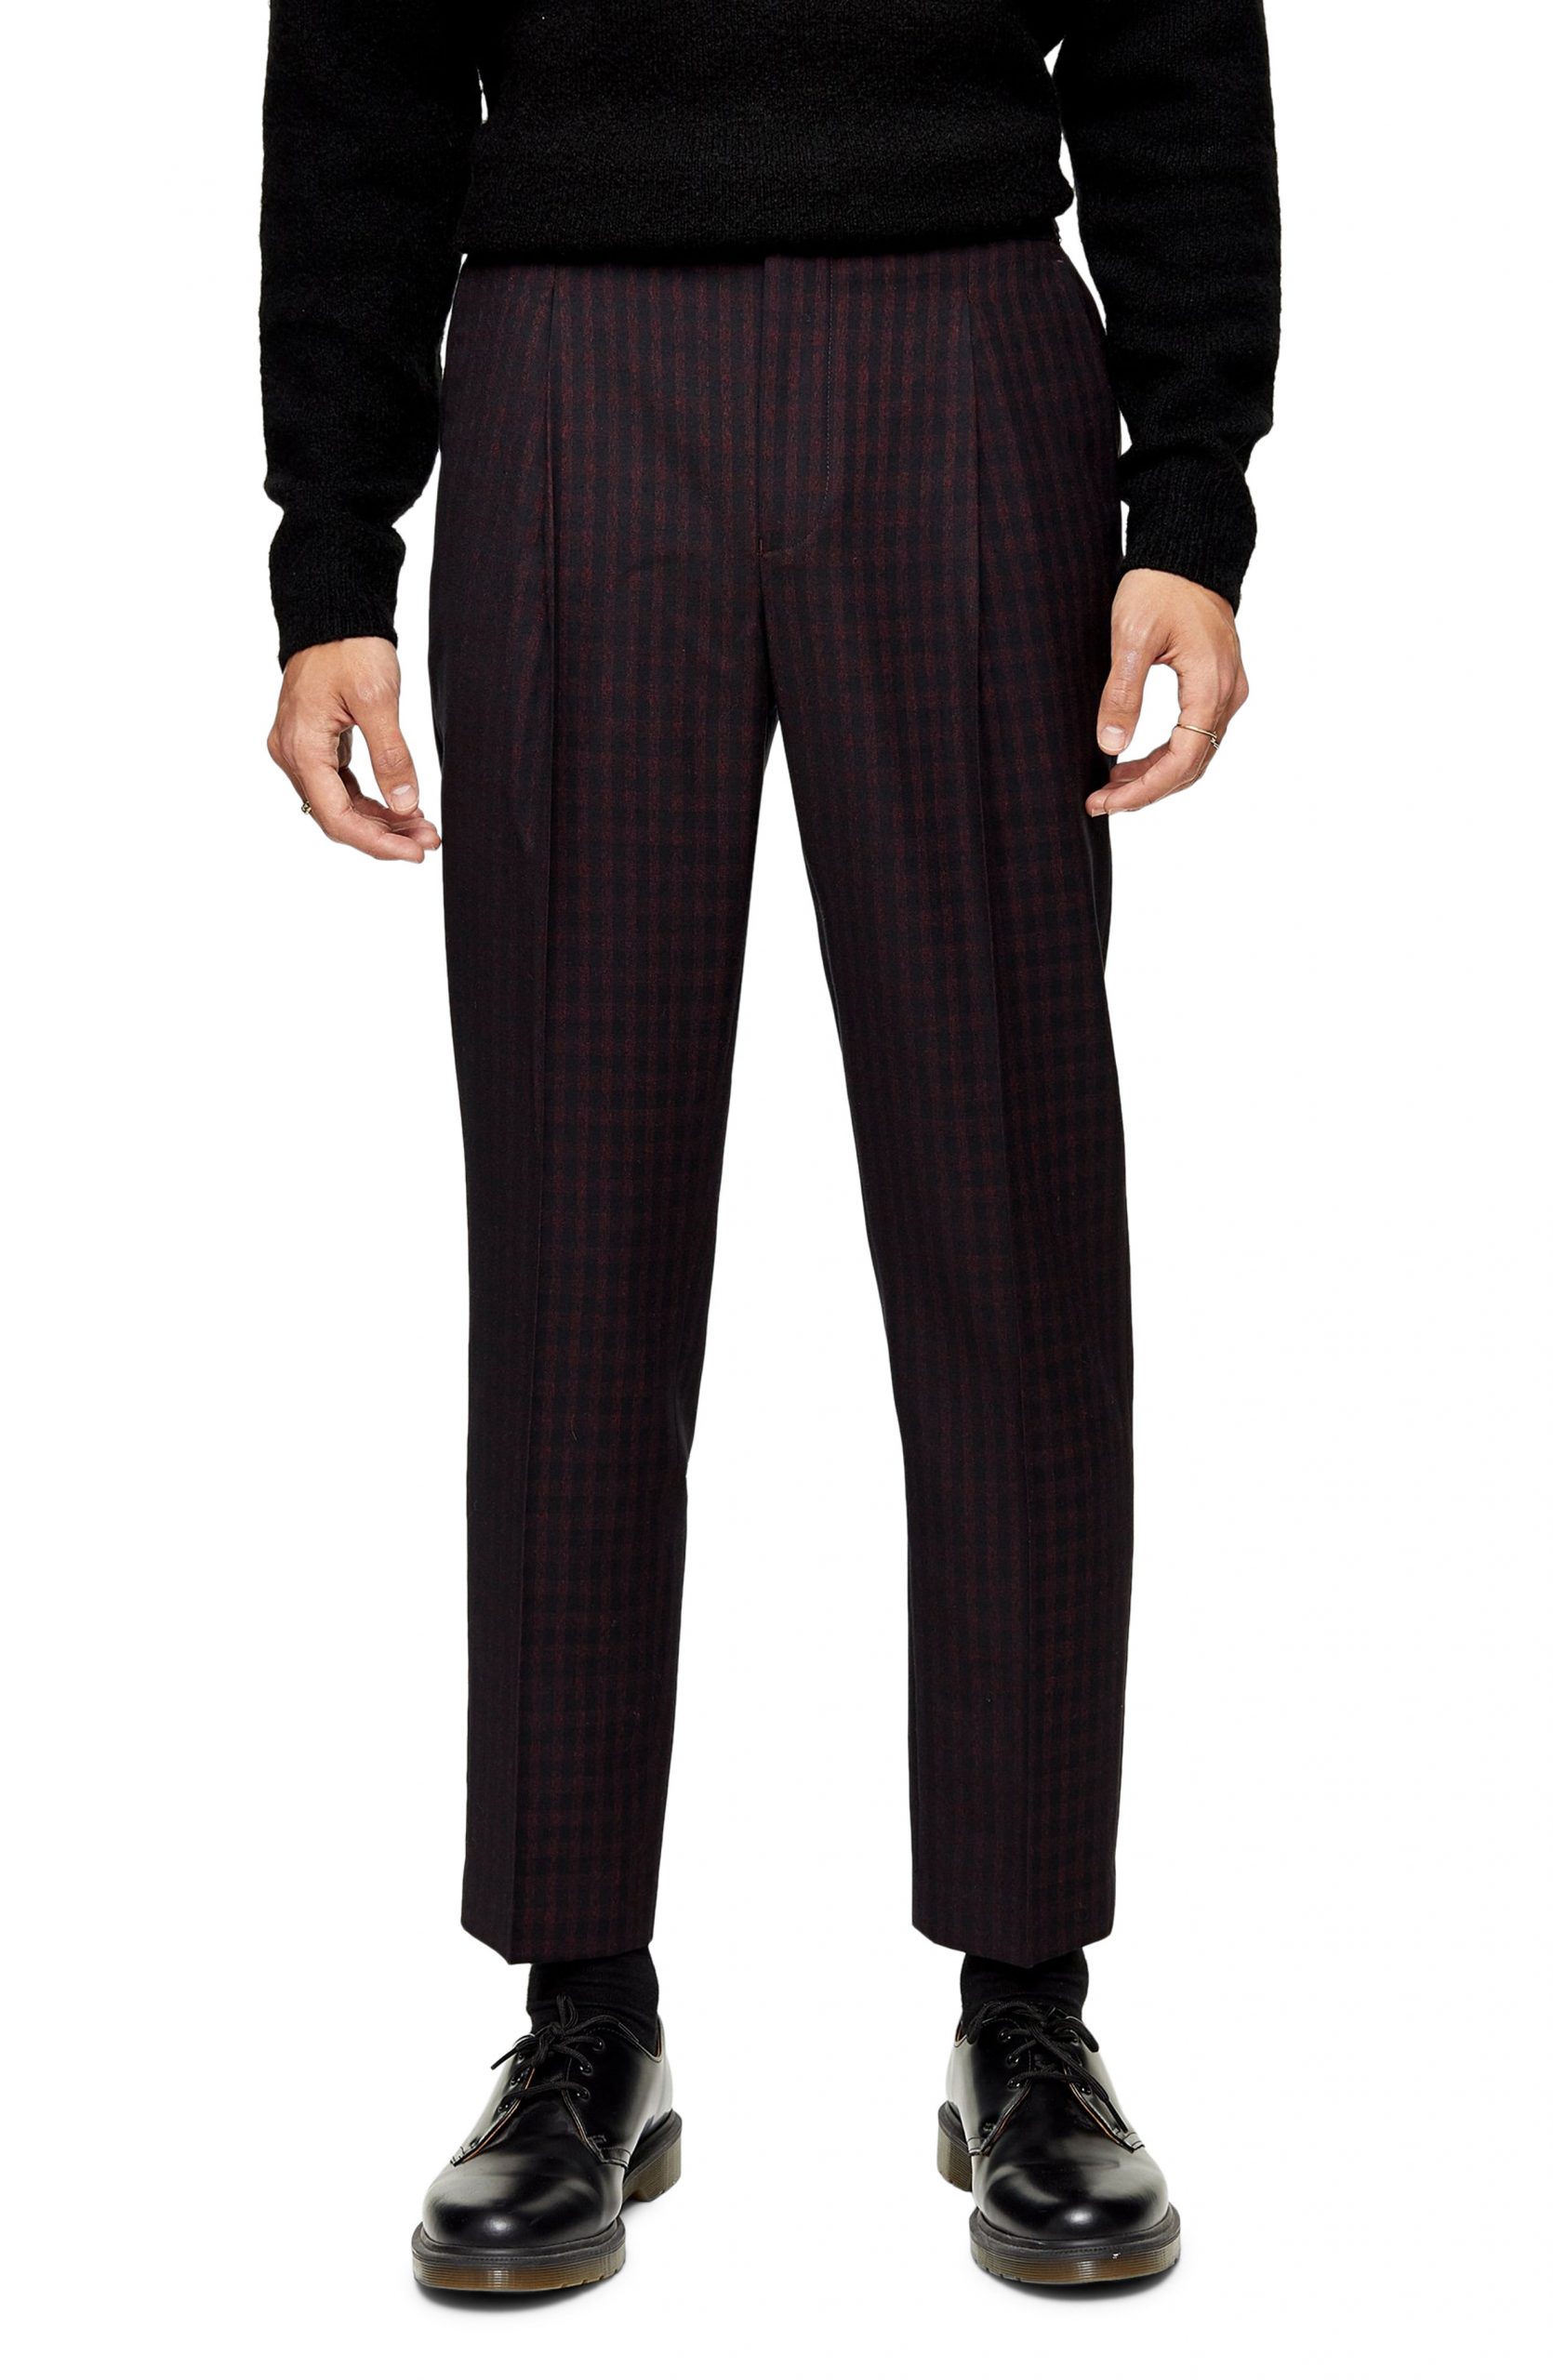 Men’s Topman Houndstooth Tapered Fit Trousers, Size 32 x 32 - Burgundy ...